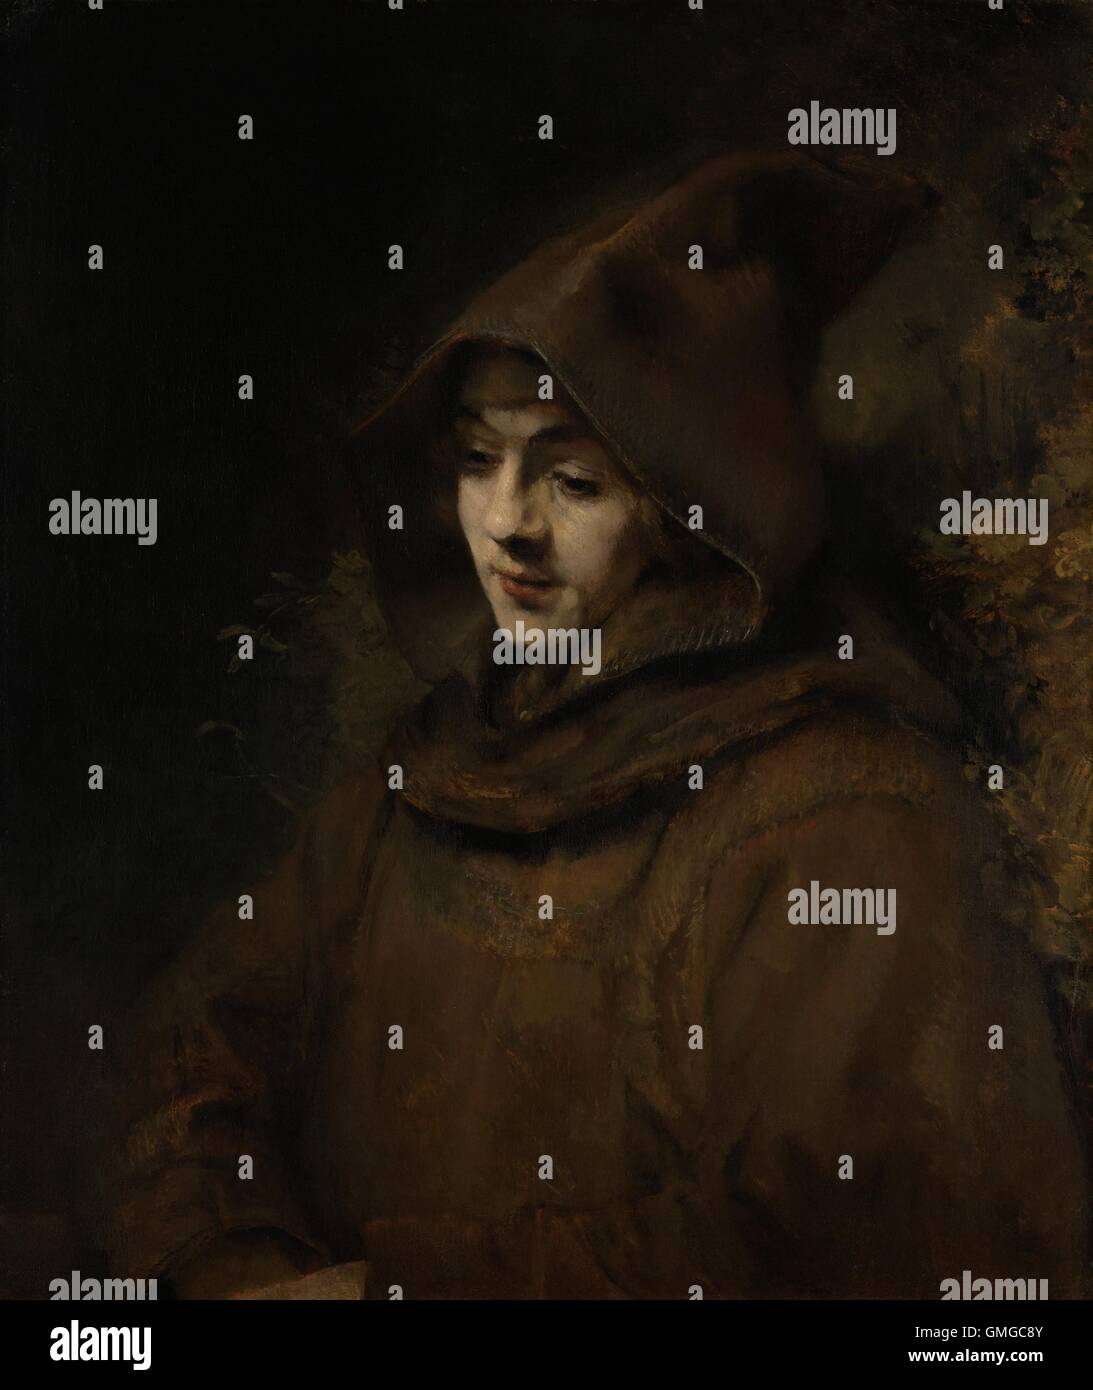 Rembrandt’s Son Titus in a Monk’s Habit, by Rembrandt van Rijn, 1660, Dutch painting, oil on canvas. In a Franciscan monk's habit, this is probably a representation of St. Francis of Assisi (BSLOC 2016 3 19) Stock Photo